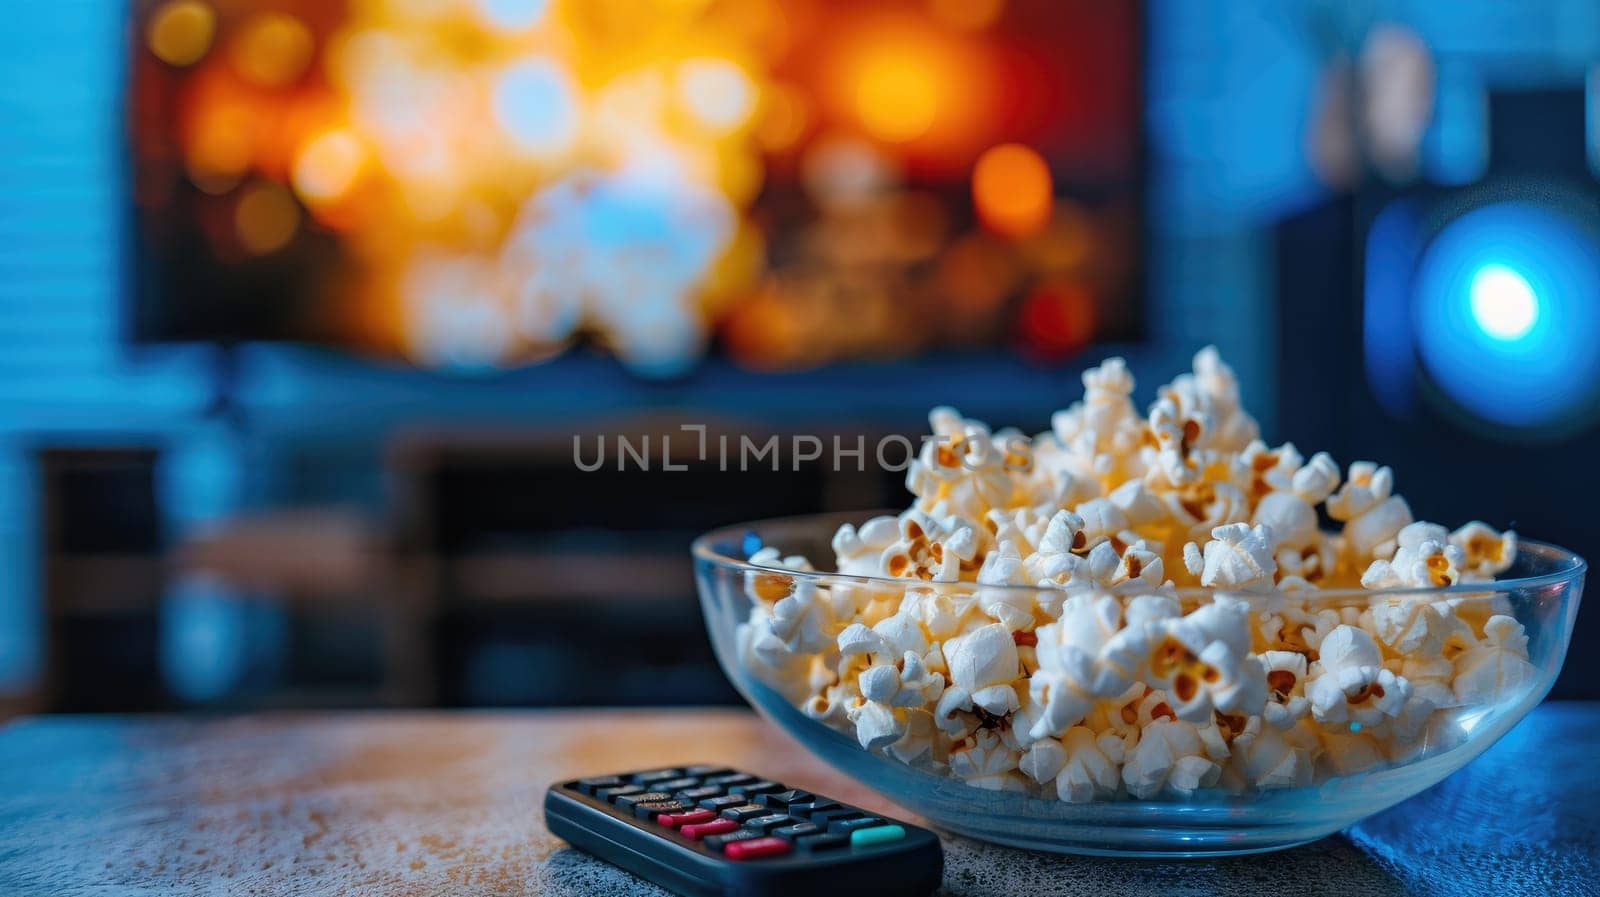 Movie times, Popcorn in a glass bowl and remote control in front of the TV in a home interior.